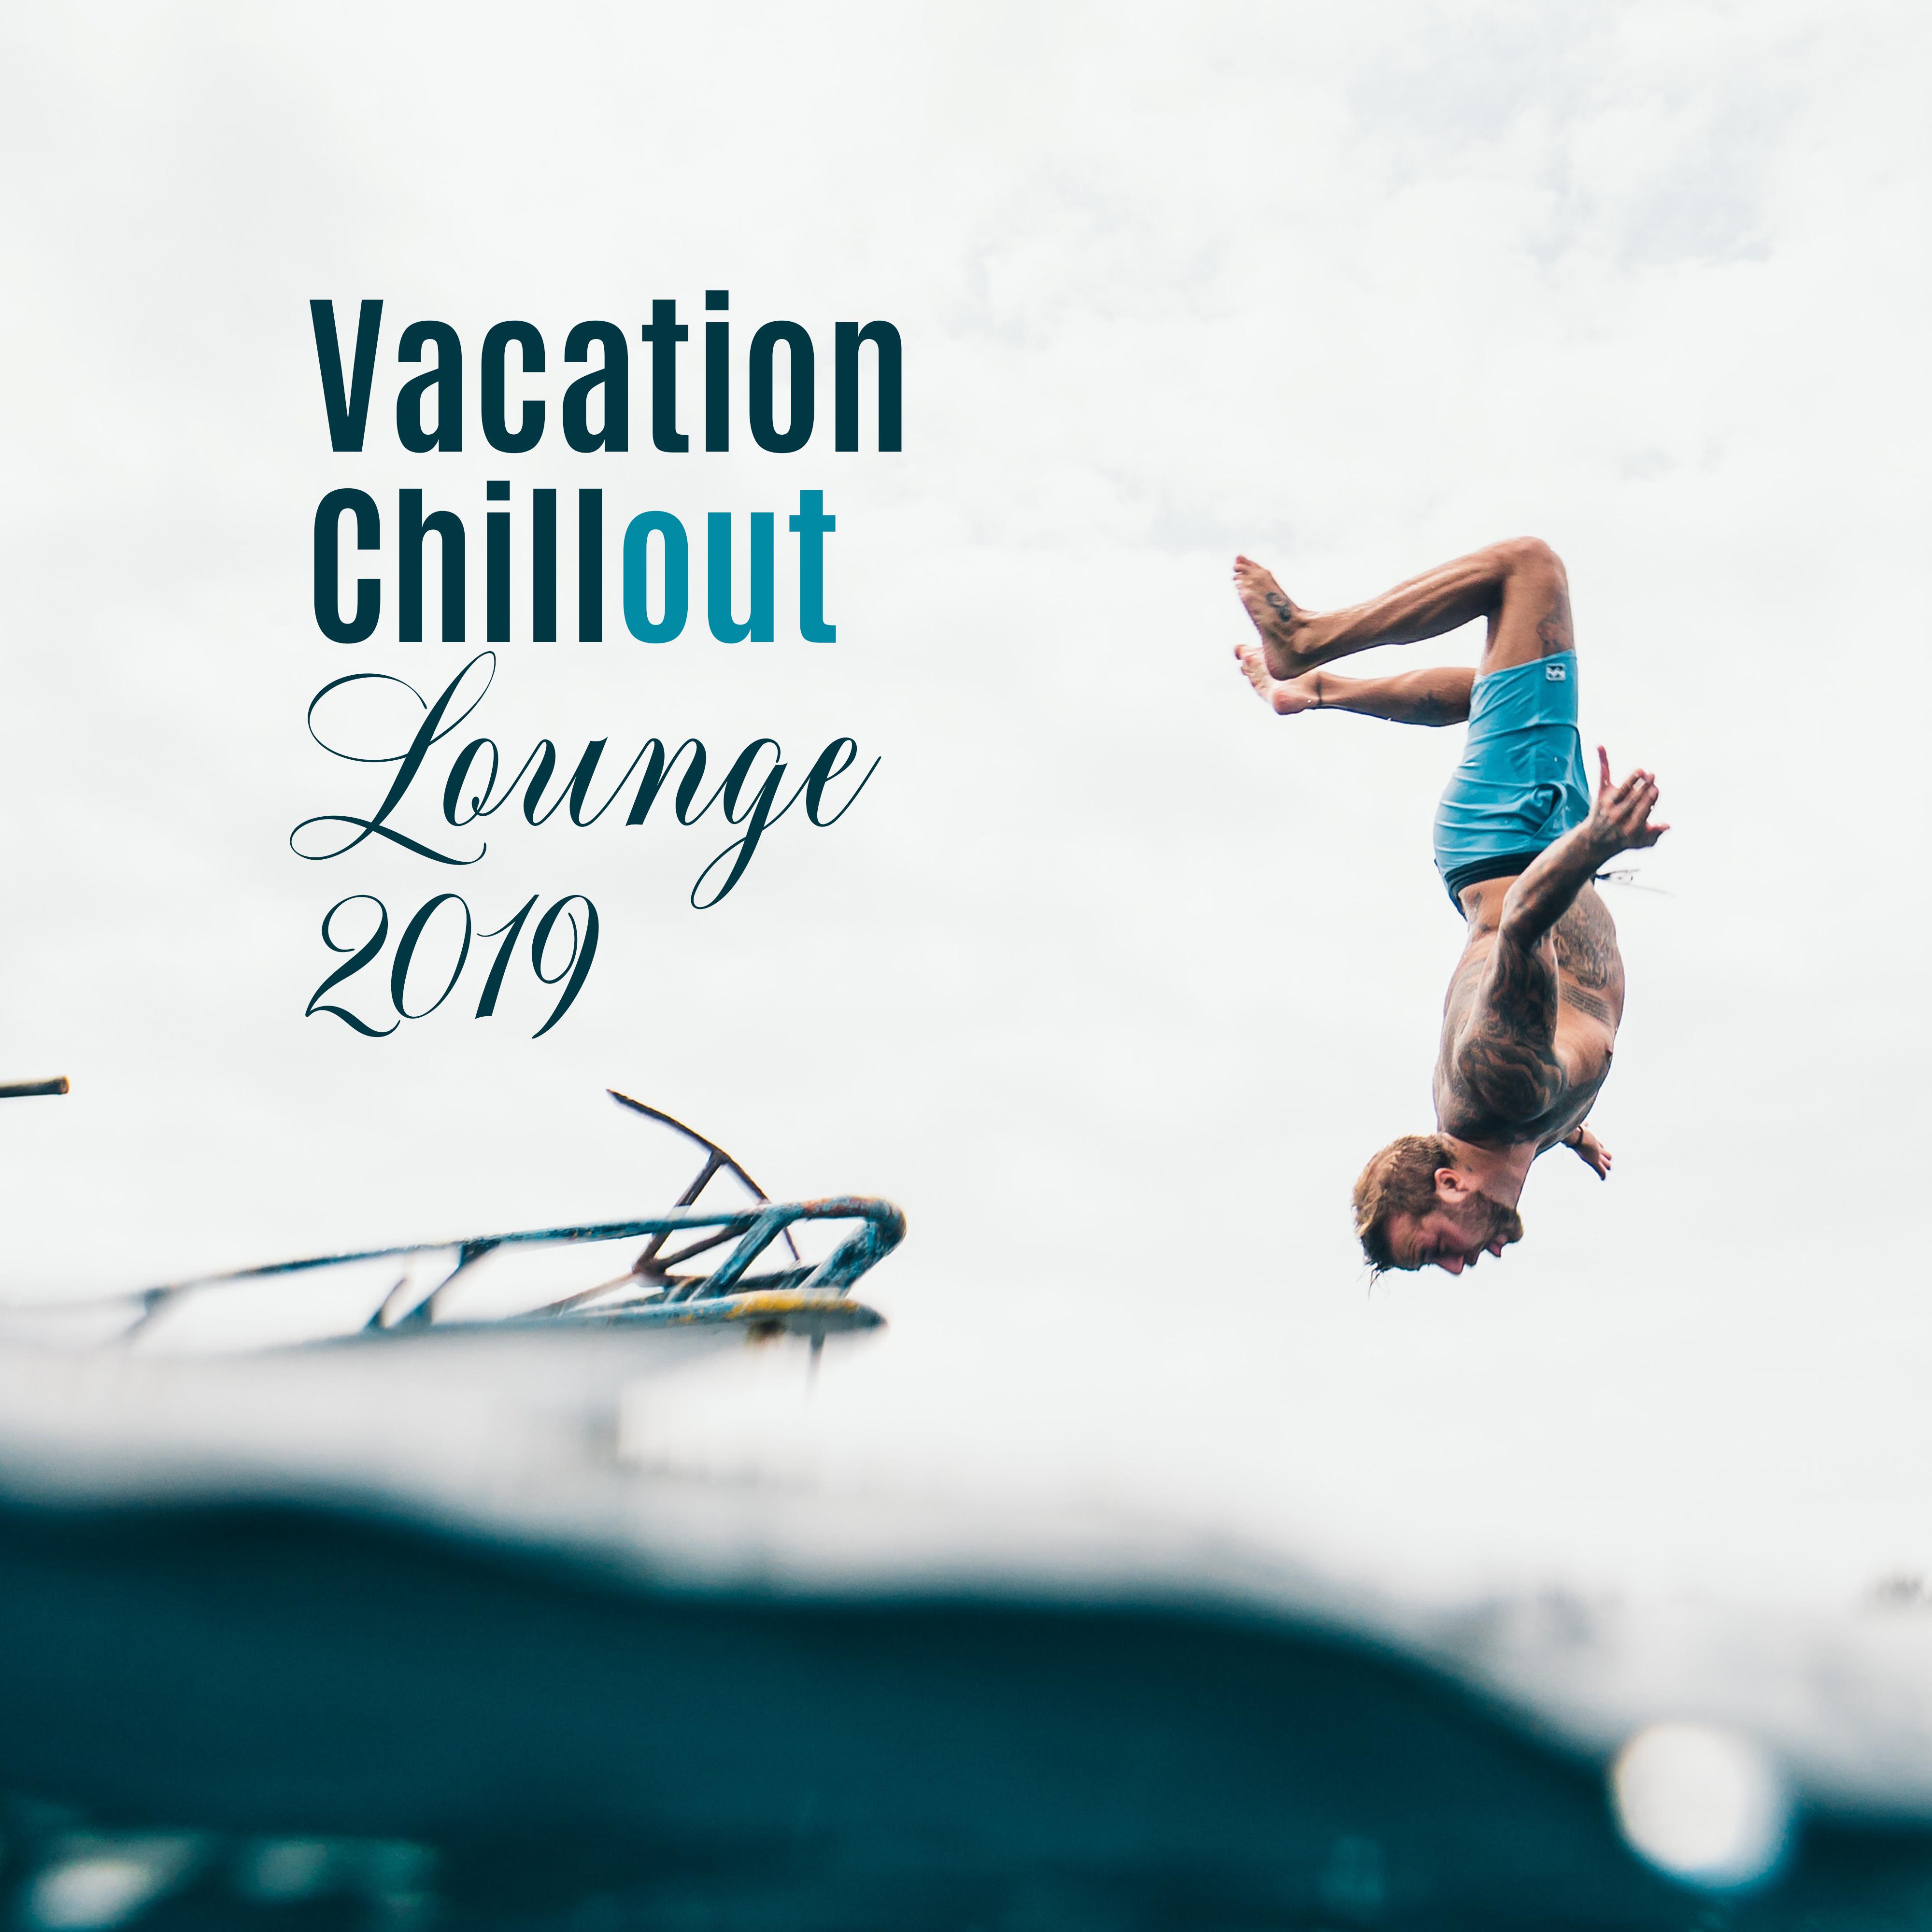 Vacation Chillout Lounge 2019: Compilation of Best Summer Chill Out Music Songs, Ambients & Deep Beats, Holiday Relaxation on the Tropical Beach, Full Chill, Calm Down & Rest, Vital Energy Increase